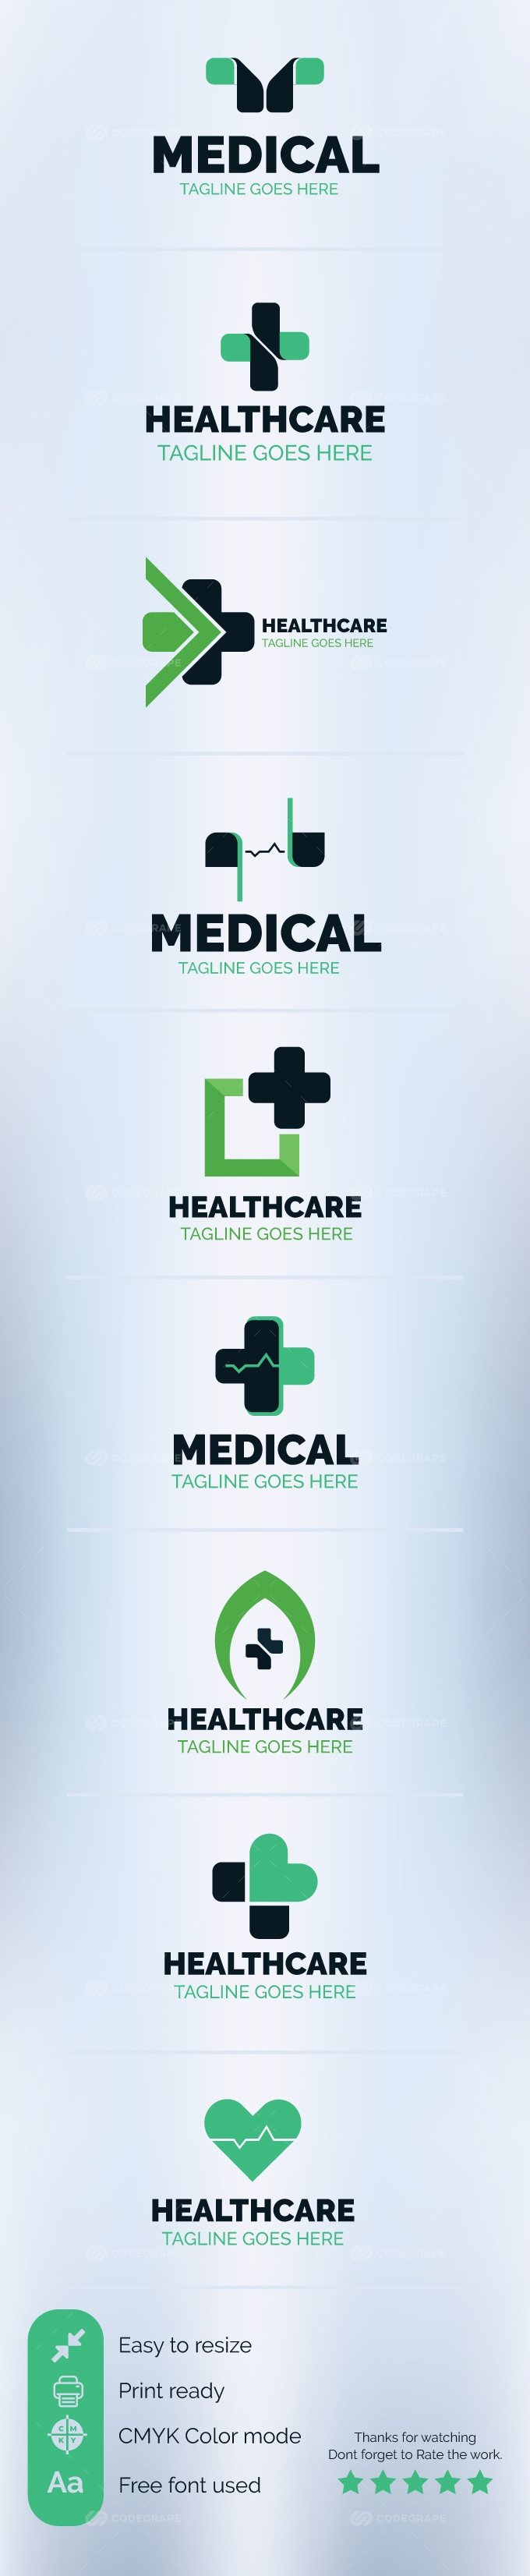 Medical and Healthcare Logo